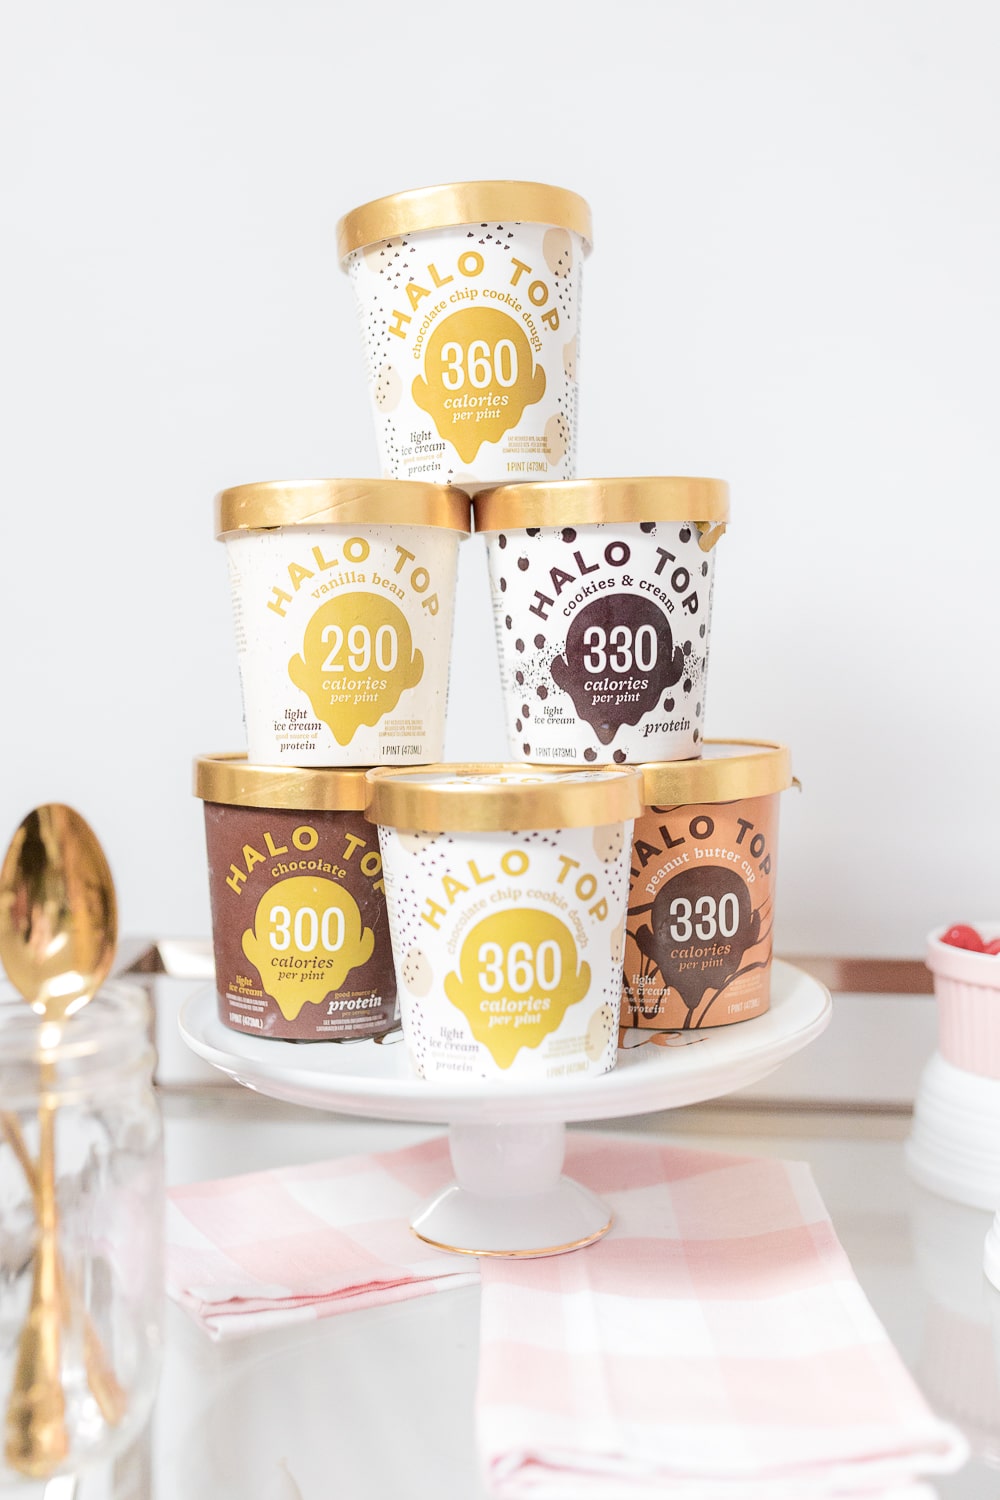 Halo Top low calorie ice cream pint tower on Diary of a Debutante